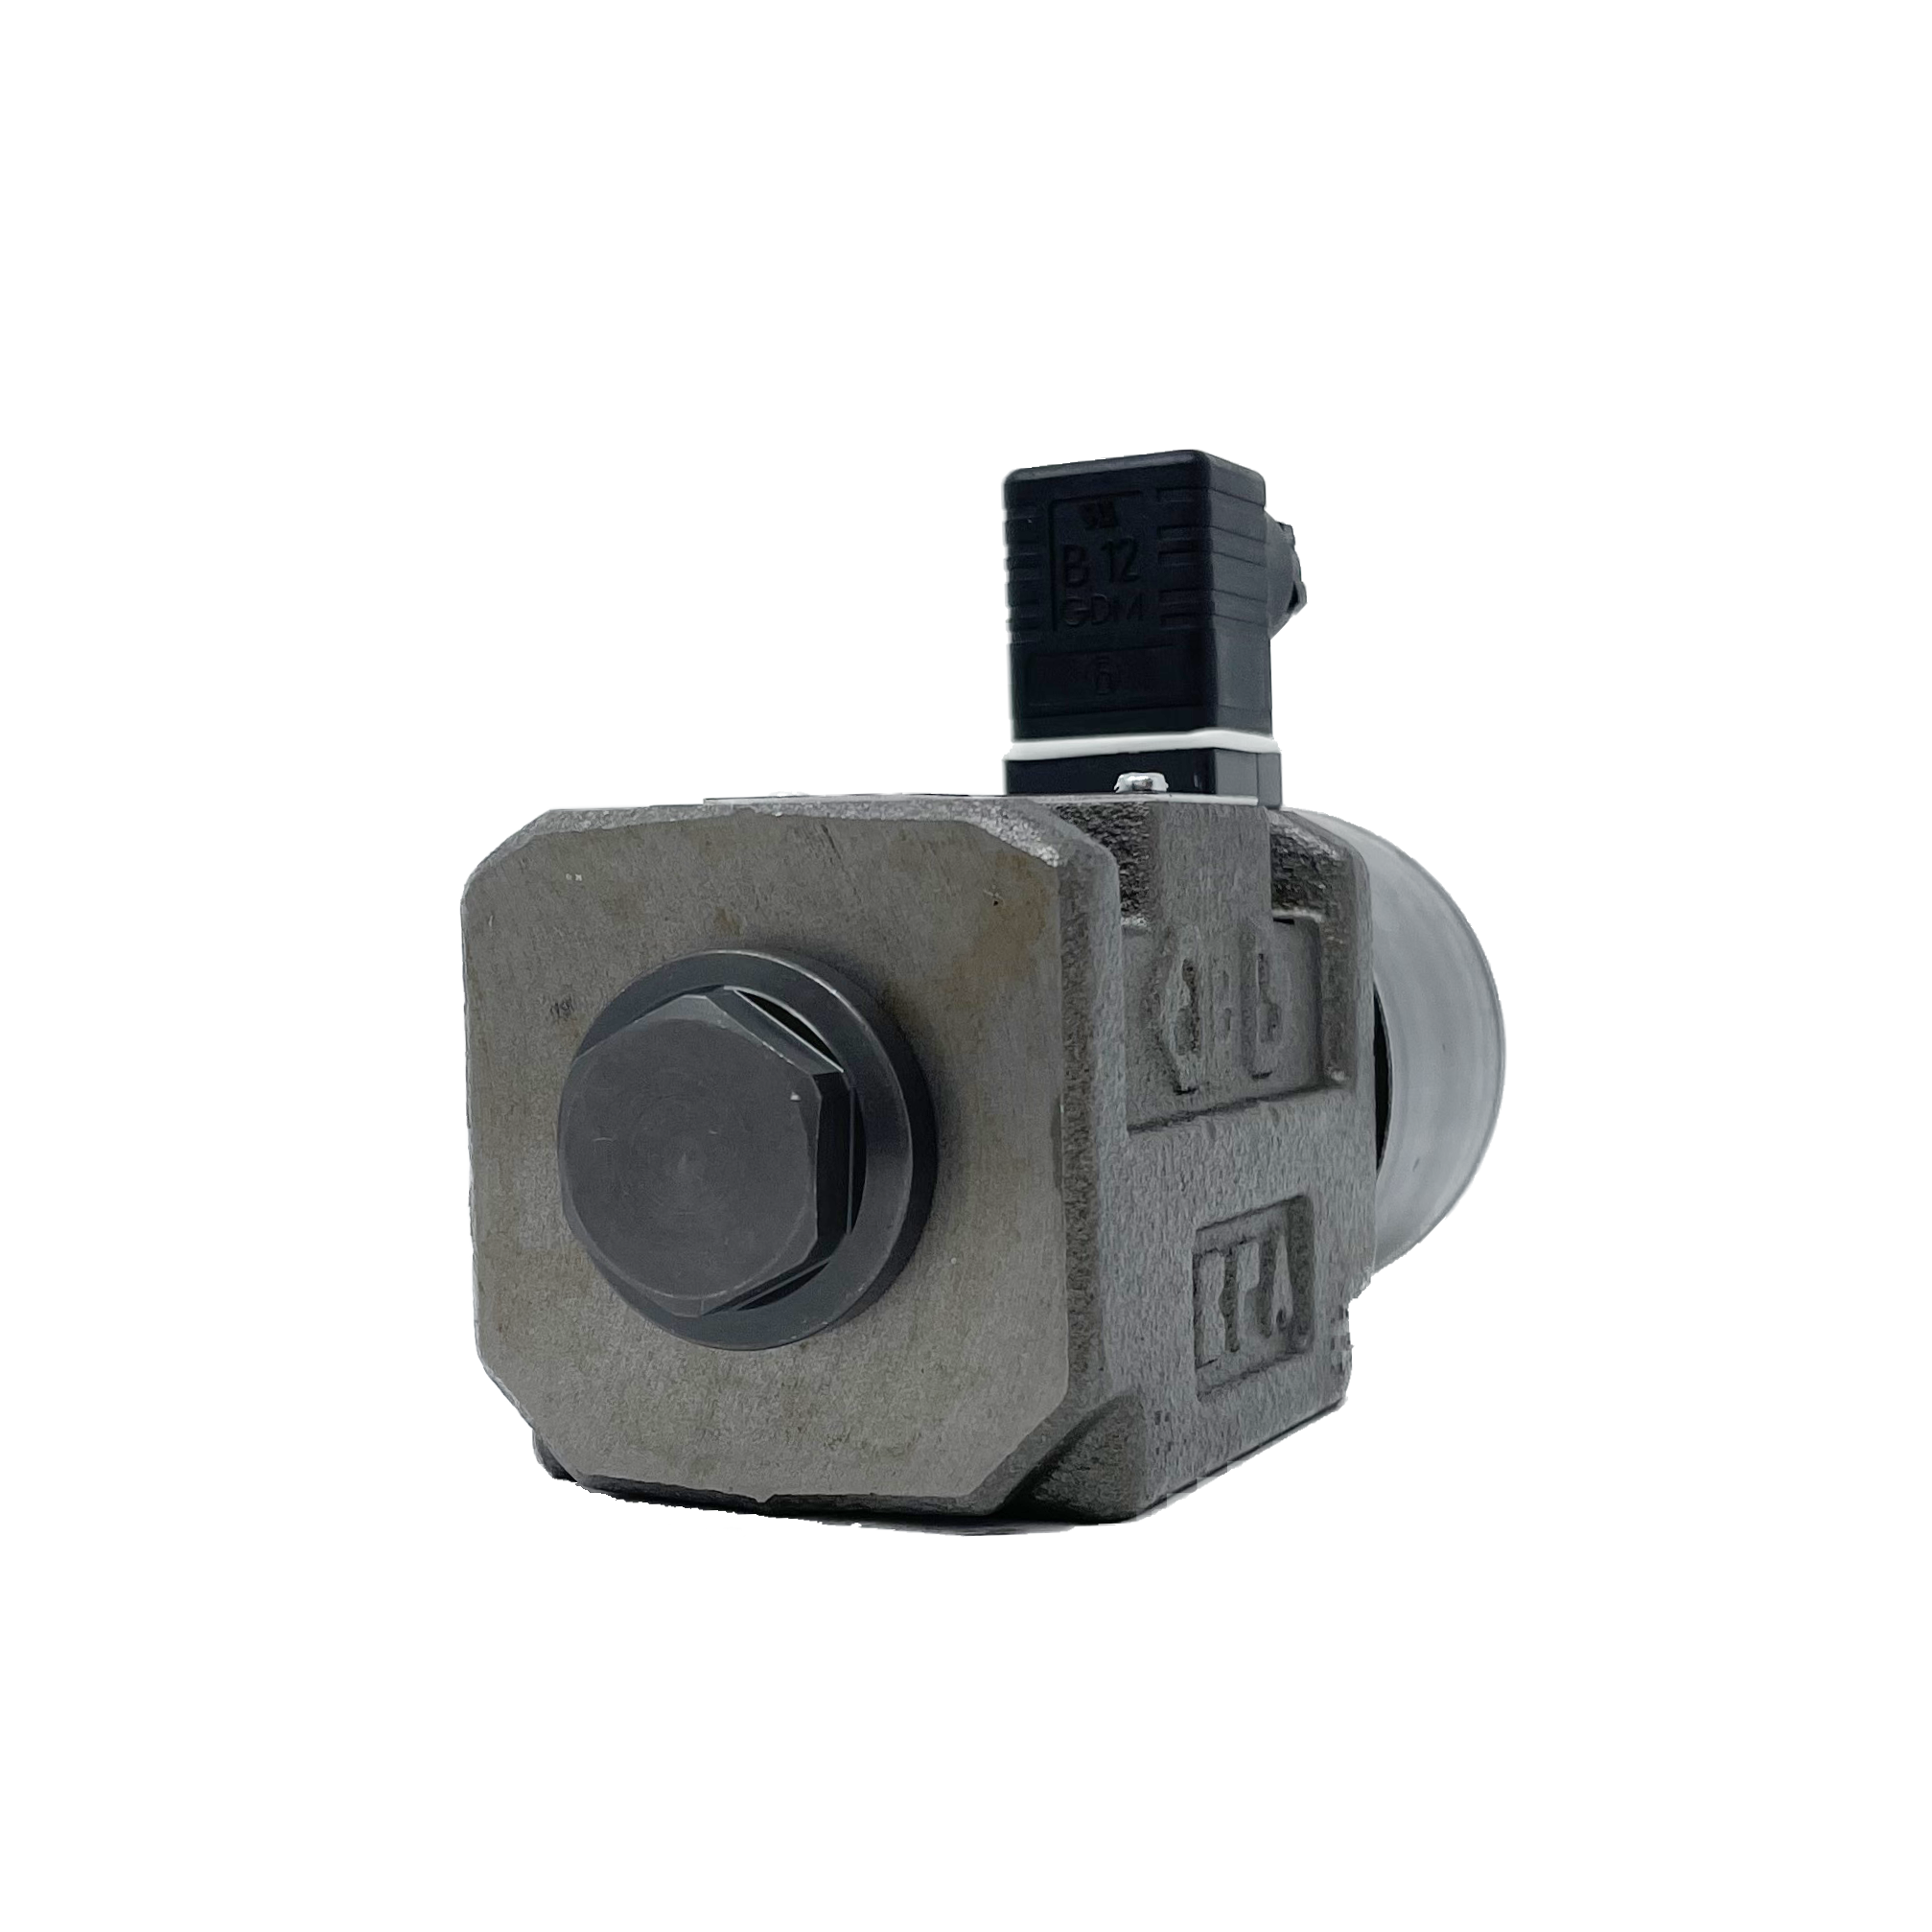 SA-G03-A4-D1-E21 : Nachi Solenoid Valve, 3P4W, D05 (NG10), 34.3GPM, 5075psi, All Ports Open Neutral, 12 VDC, DIN